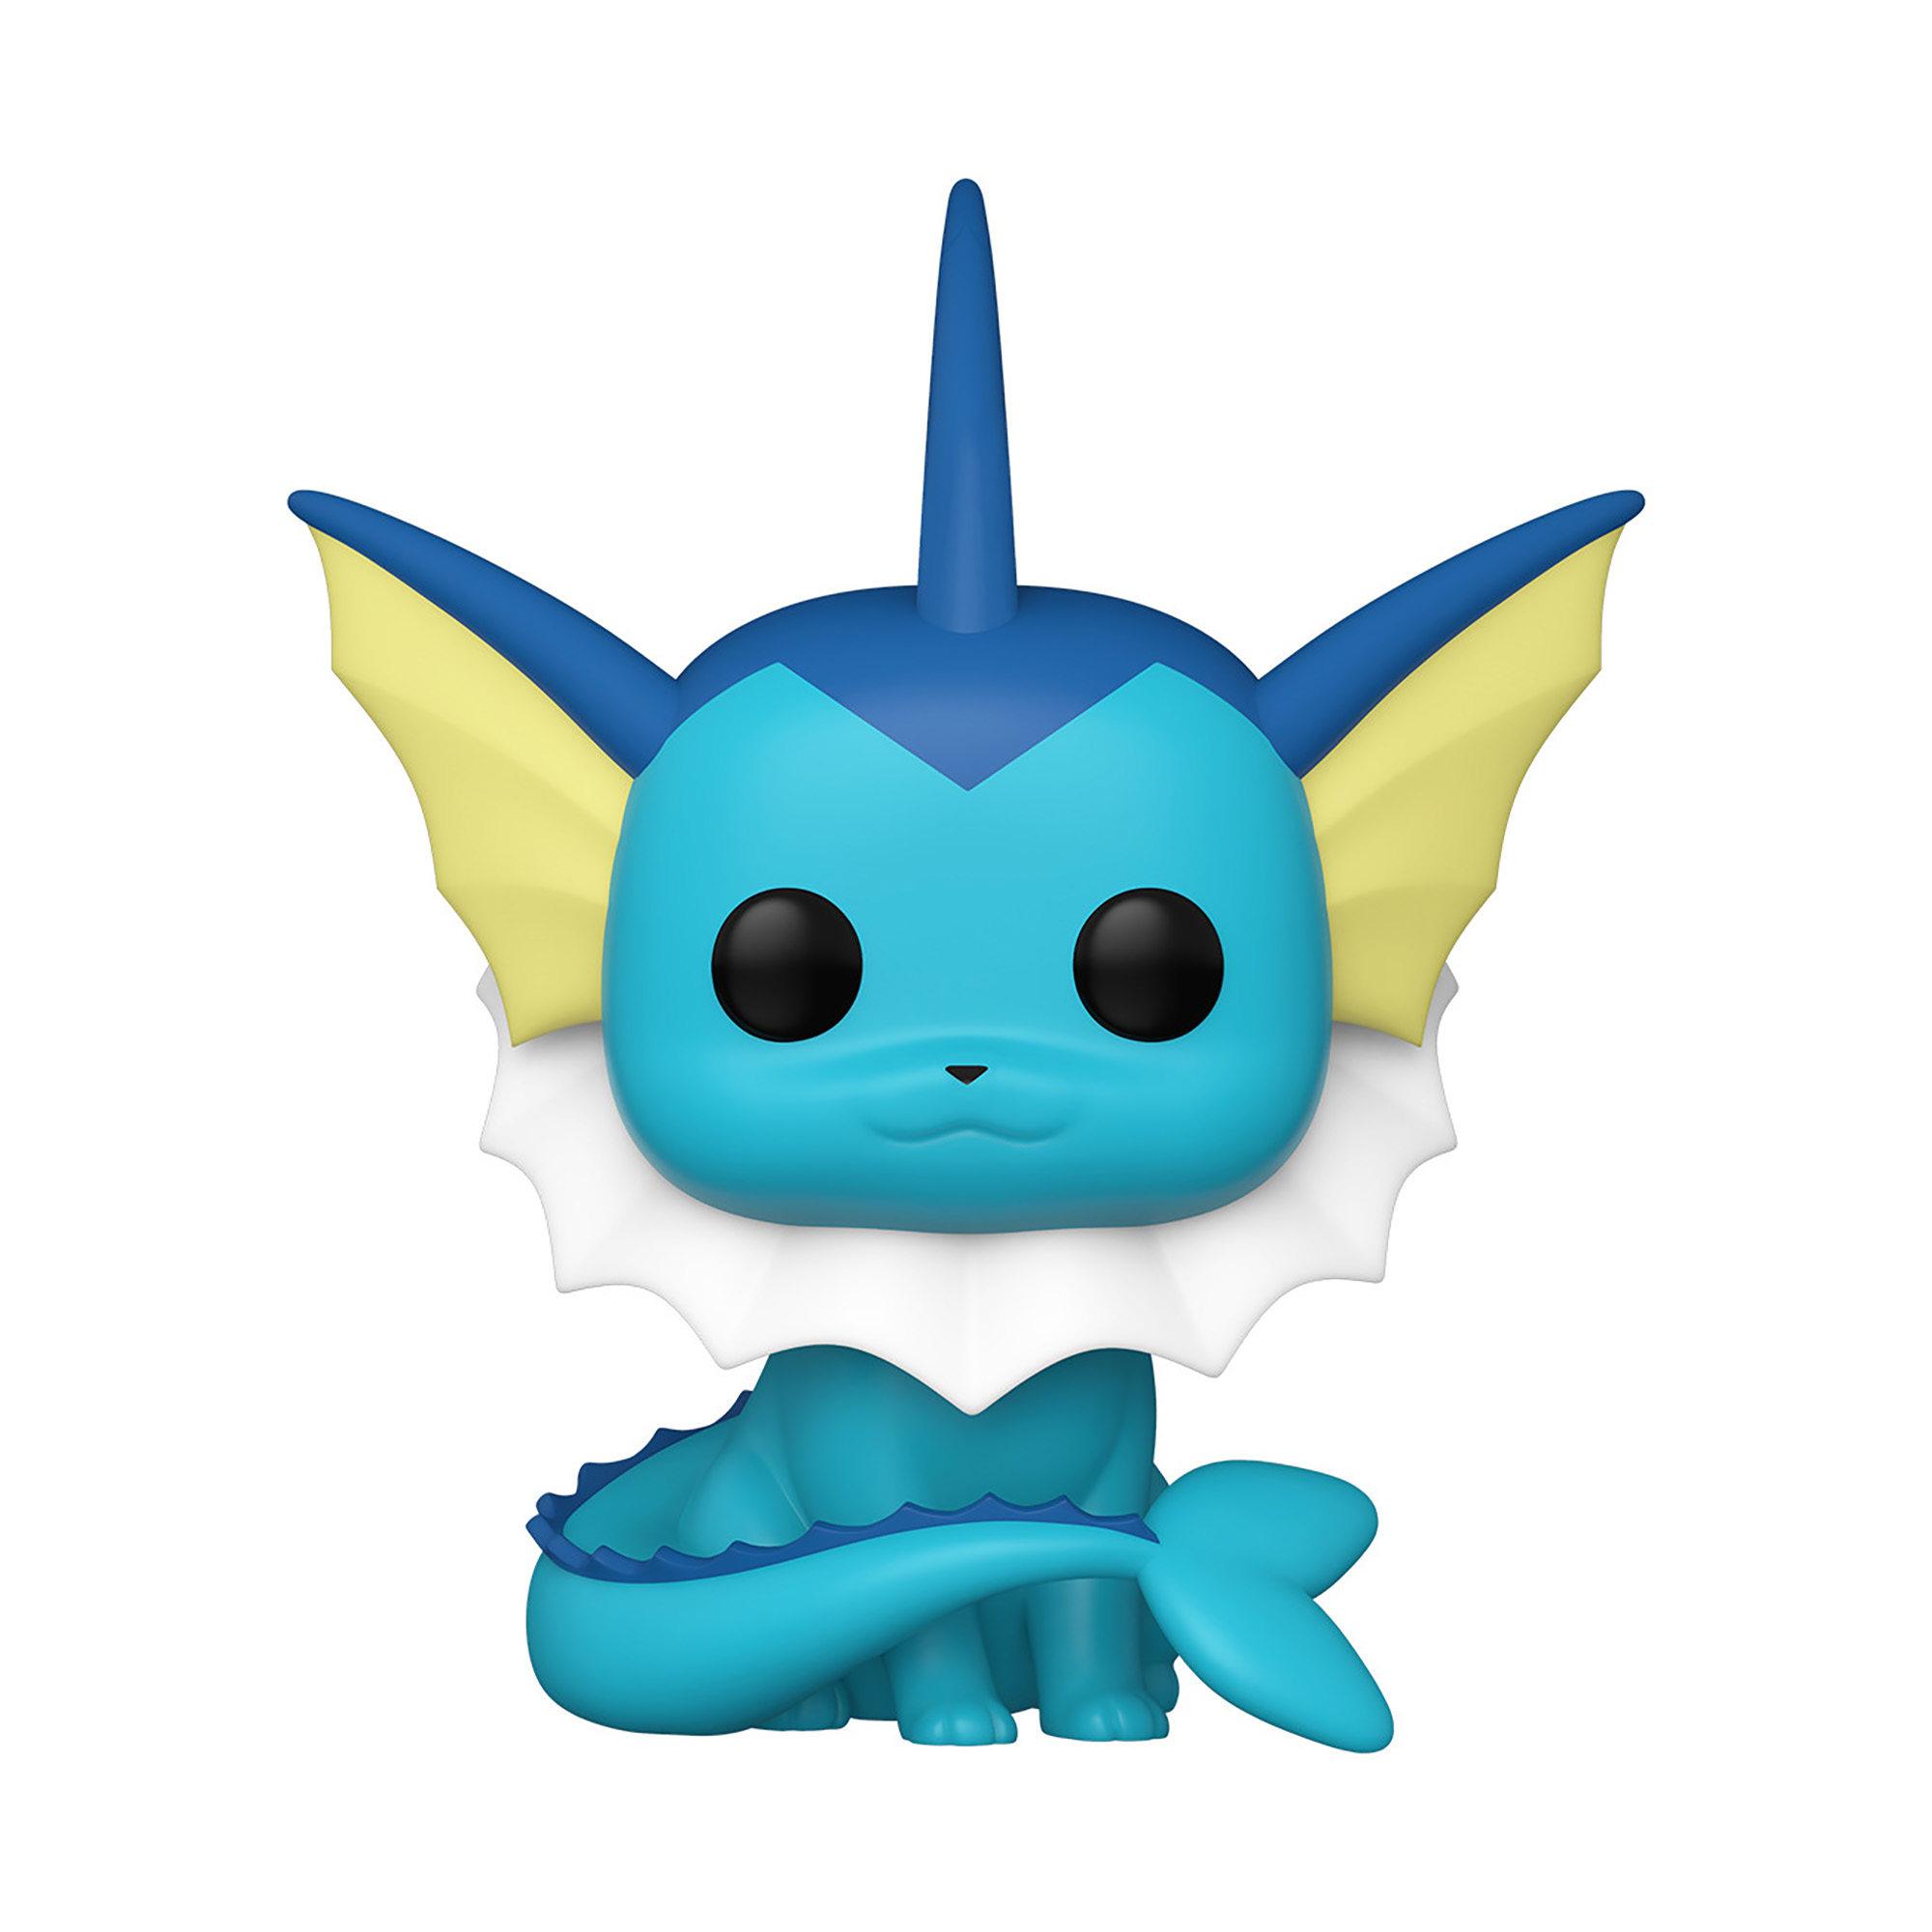 Funko POP! Games: Pokemon - Eevee - Collectable Vinyl Figure - Gift Idea -  Official Merchandise - Toys for Kids & Adults - Video Games Fans - Model